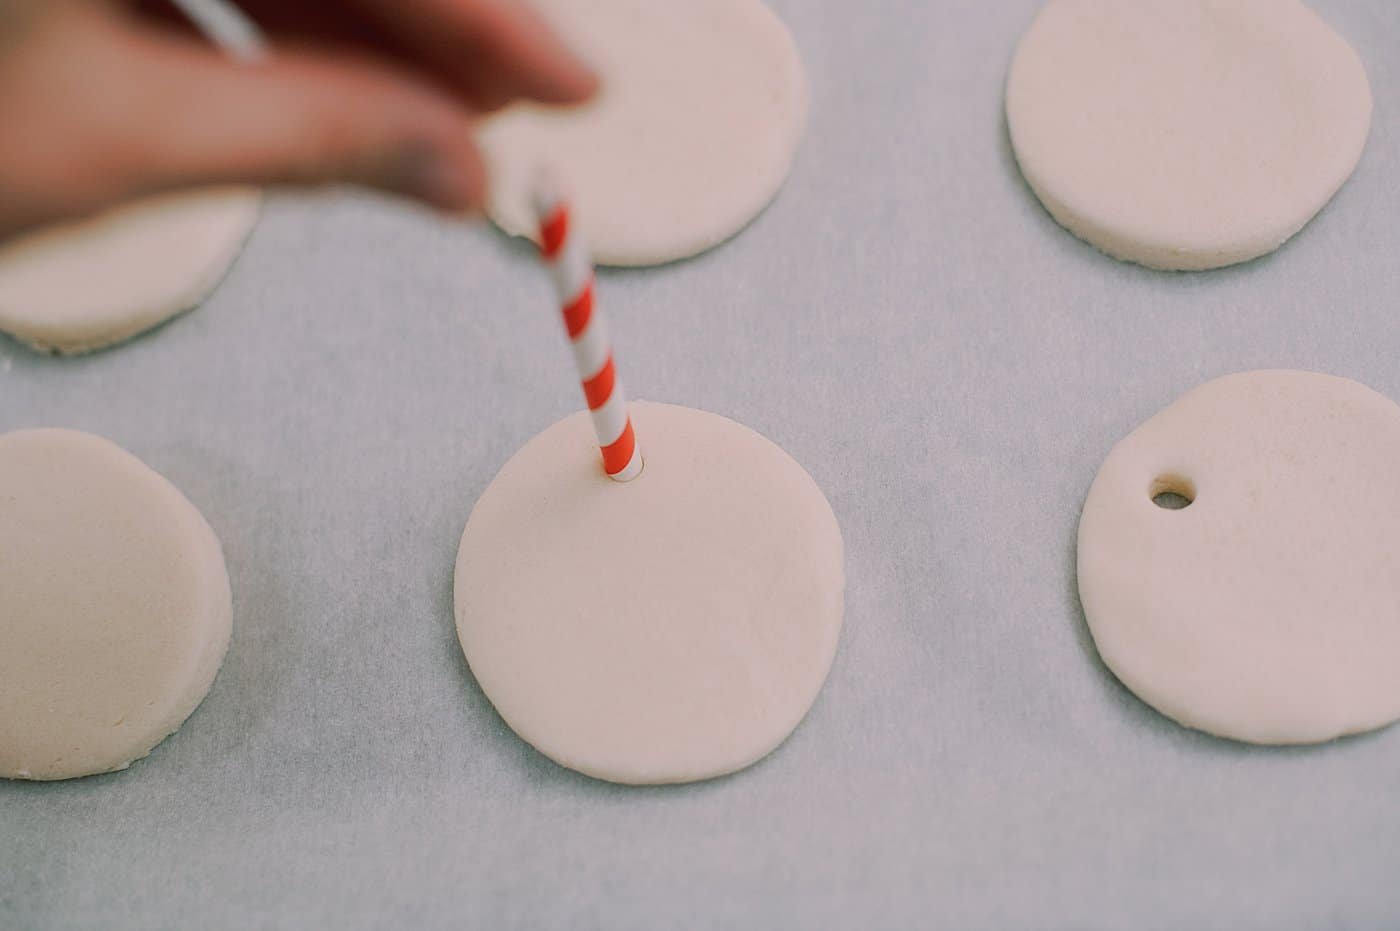 Use a straw to add holes to the top of the salt dough ornaments so you can add a hanging string.